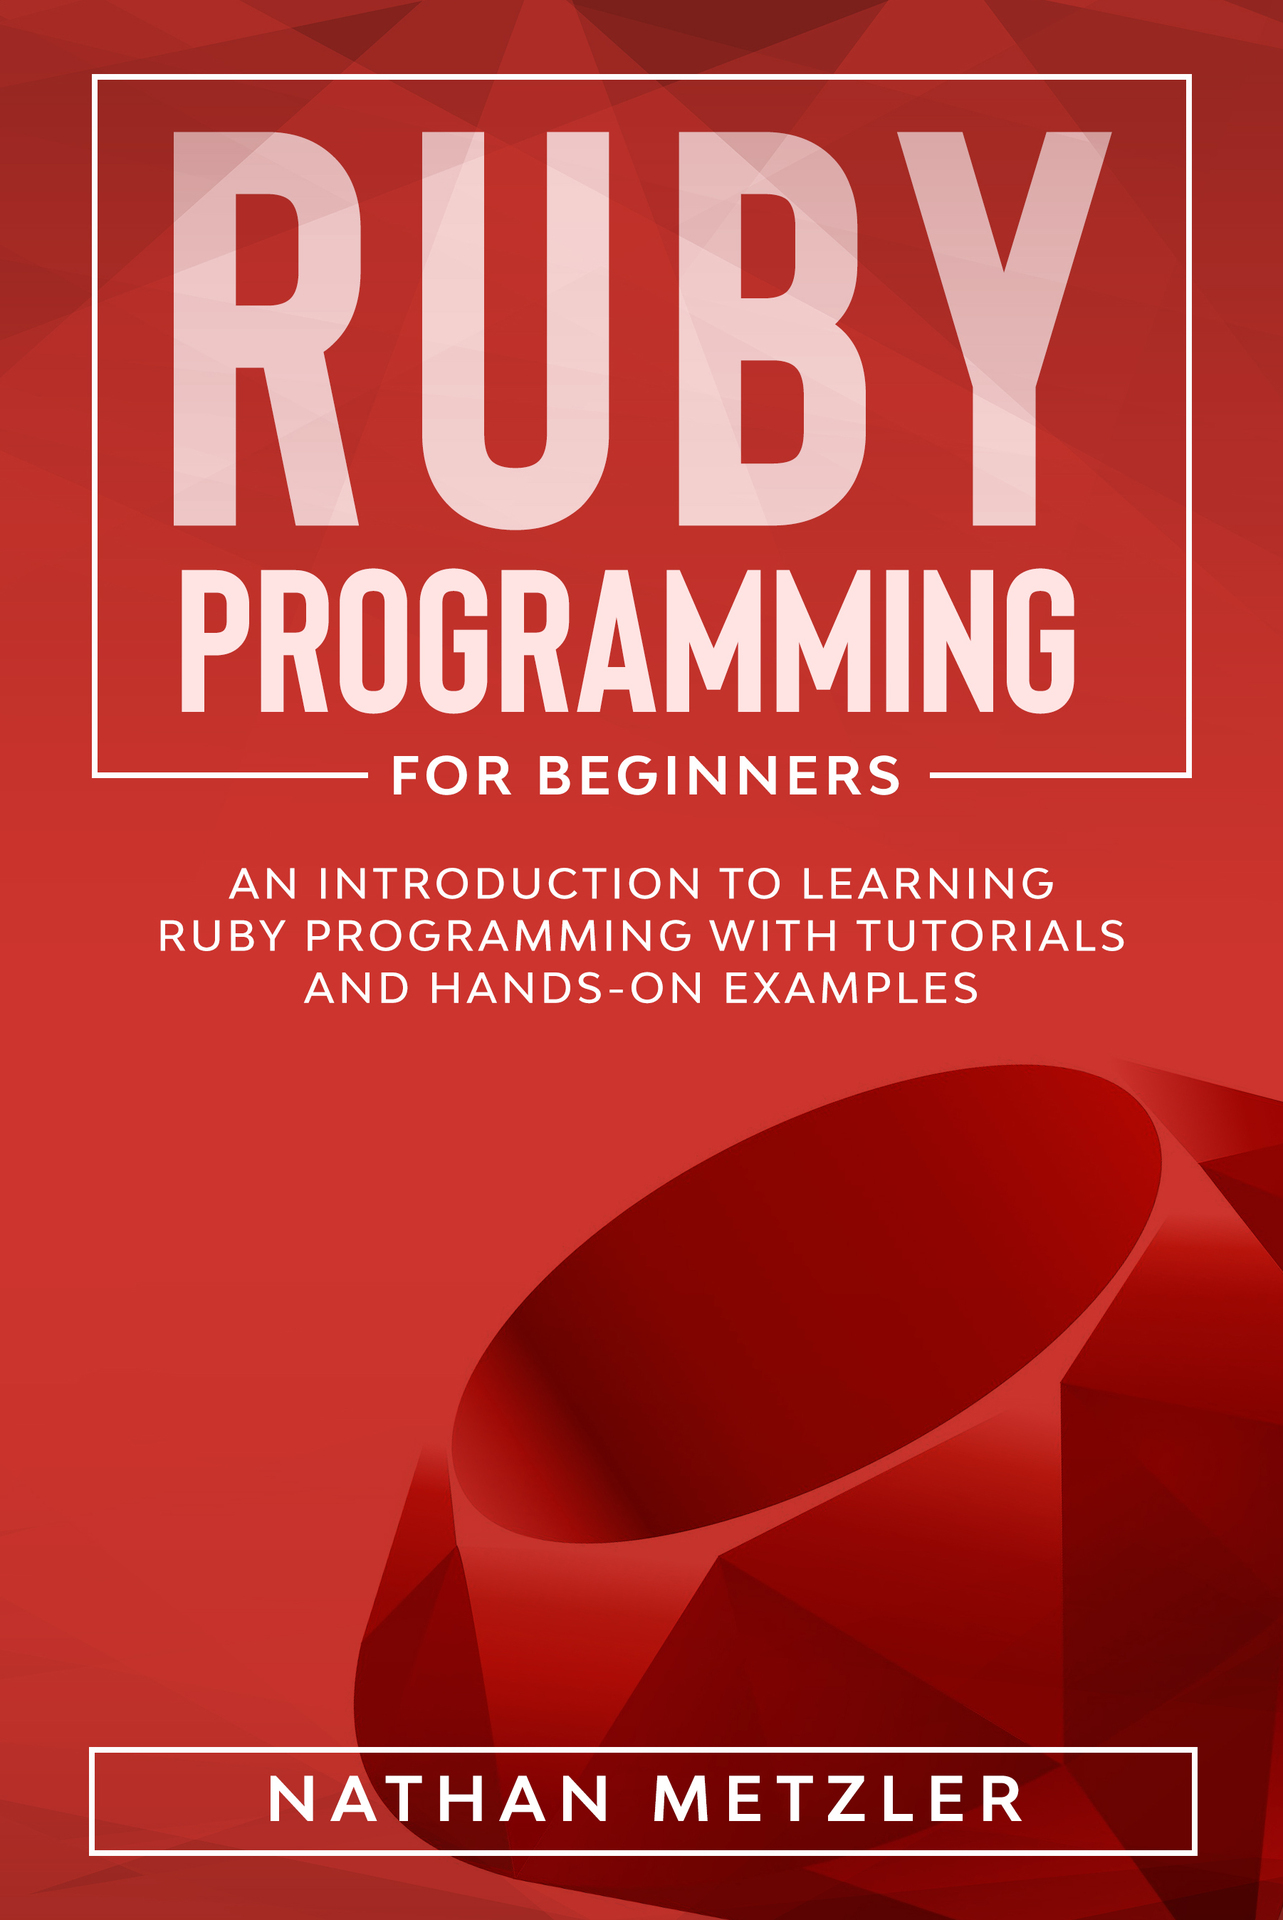 Ruby Programming for Beginners: An Introduction to Learning Ruby Programming with Tutorials and Hands-On Examples